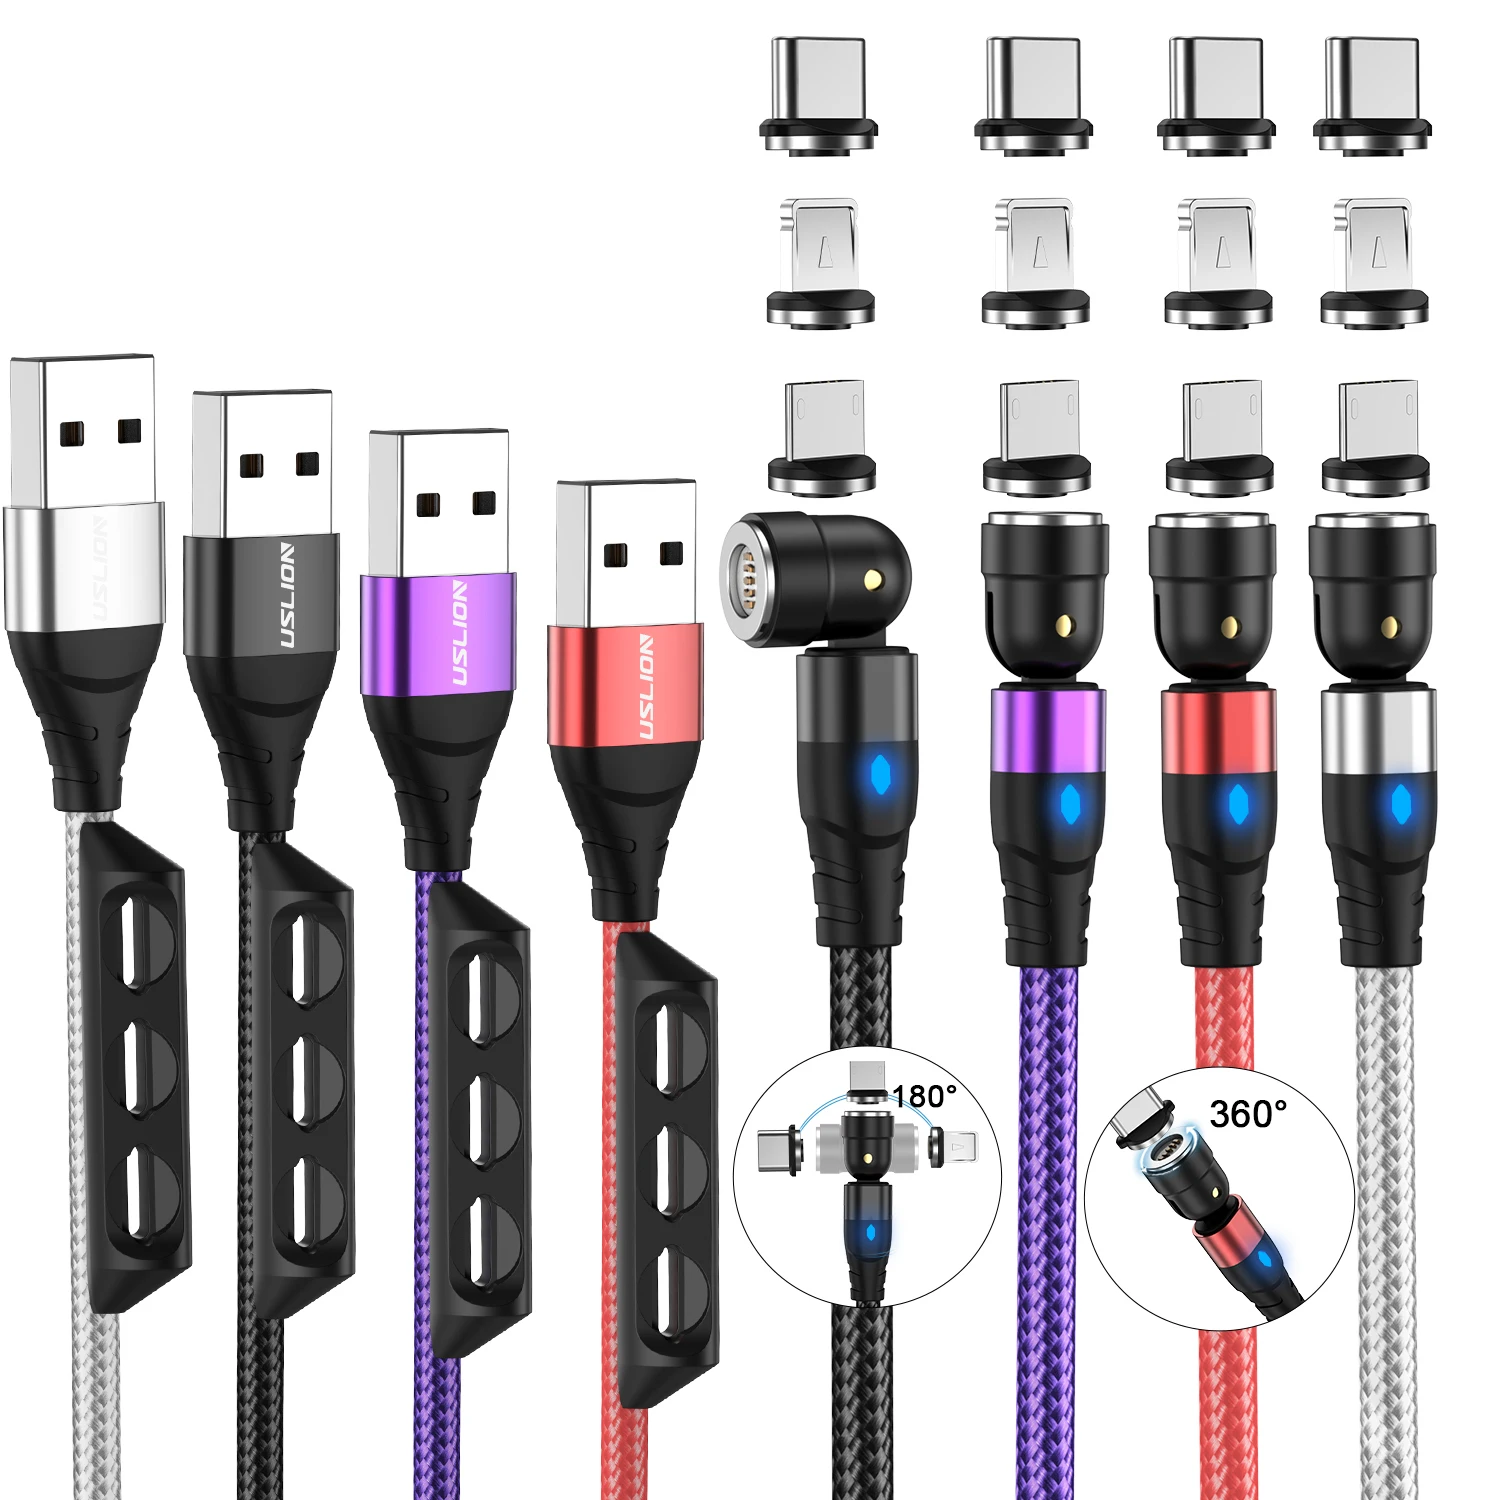 

Magnetic 3 in 1 Data Cable for Huawei for iPhone Micro Type C Fast Charger Cable 3A for Samsung Charging Wire 540 Rotate Cord, Black,red,silver,purple